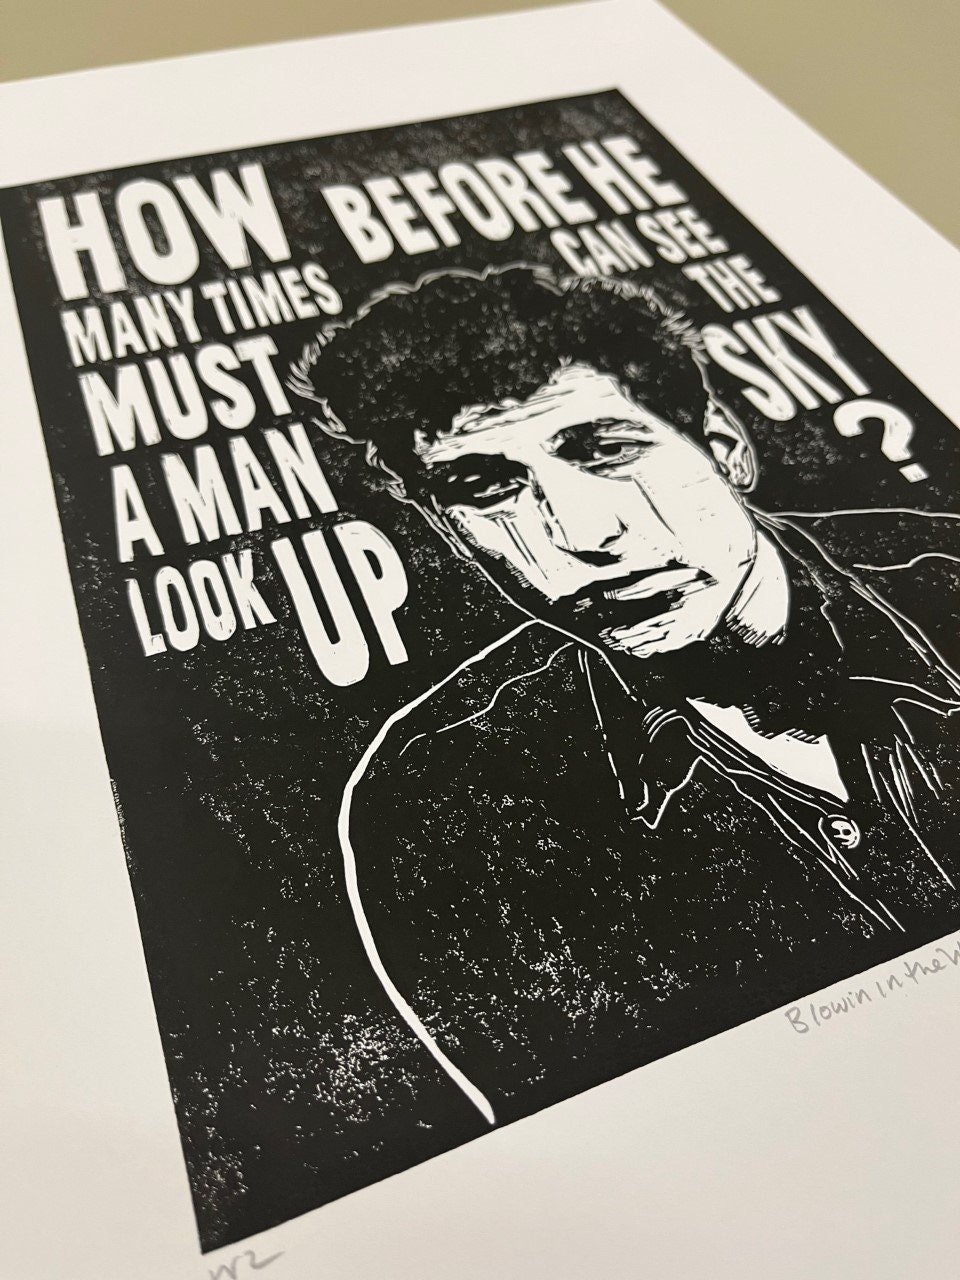 Image of Bob Dylan. Hand Made. Original A3 linocut print. Limited and Signed. Art.